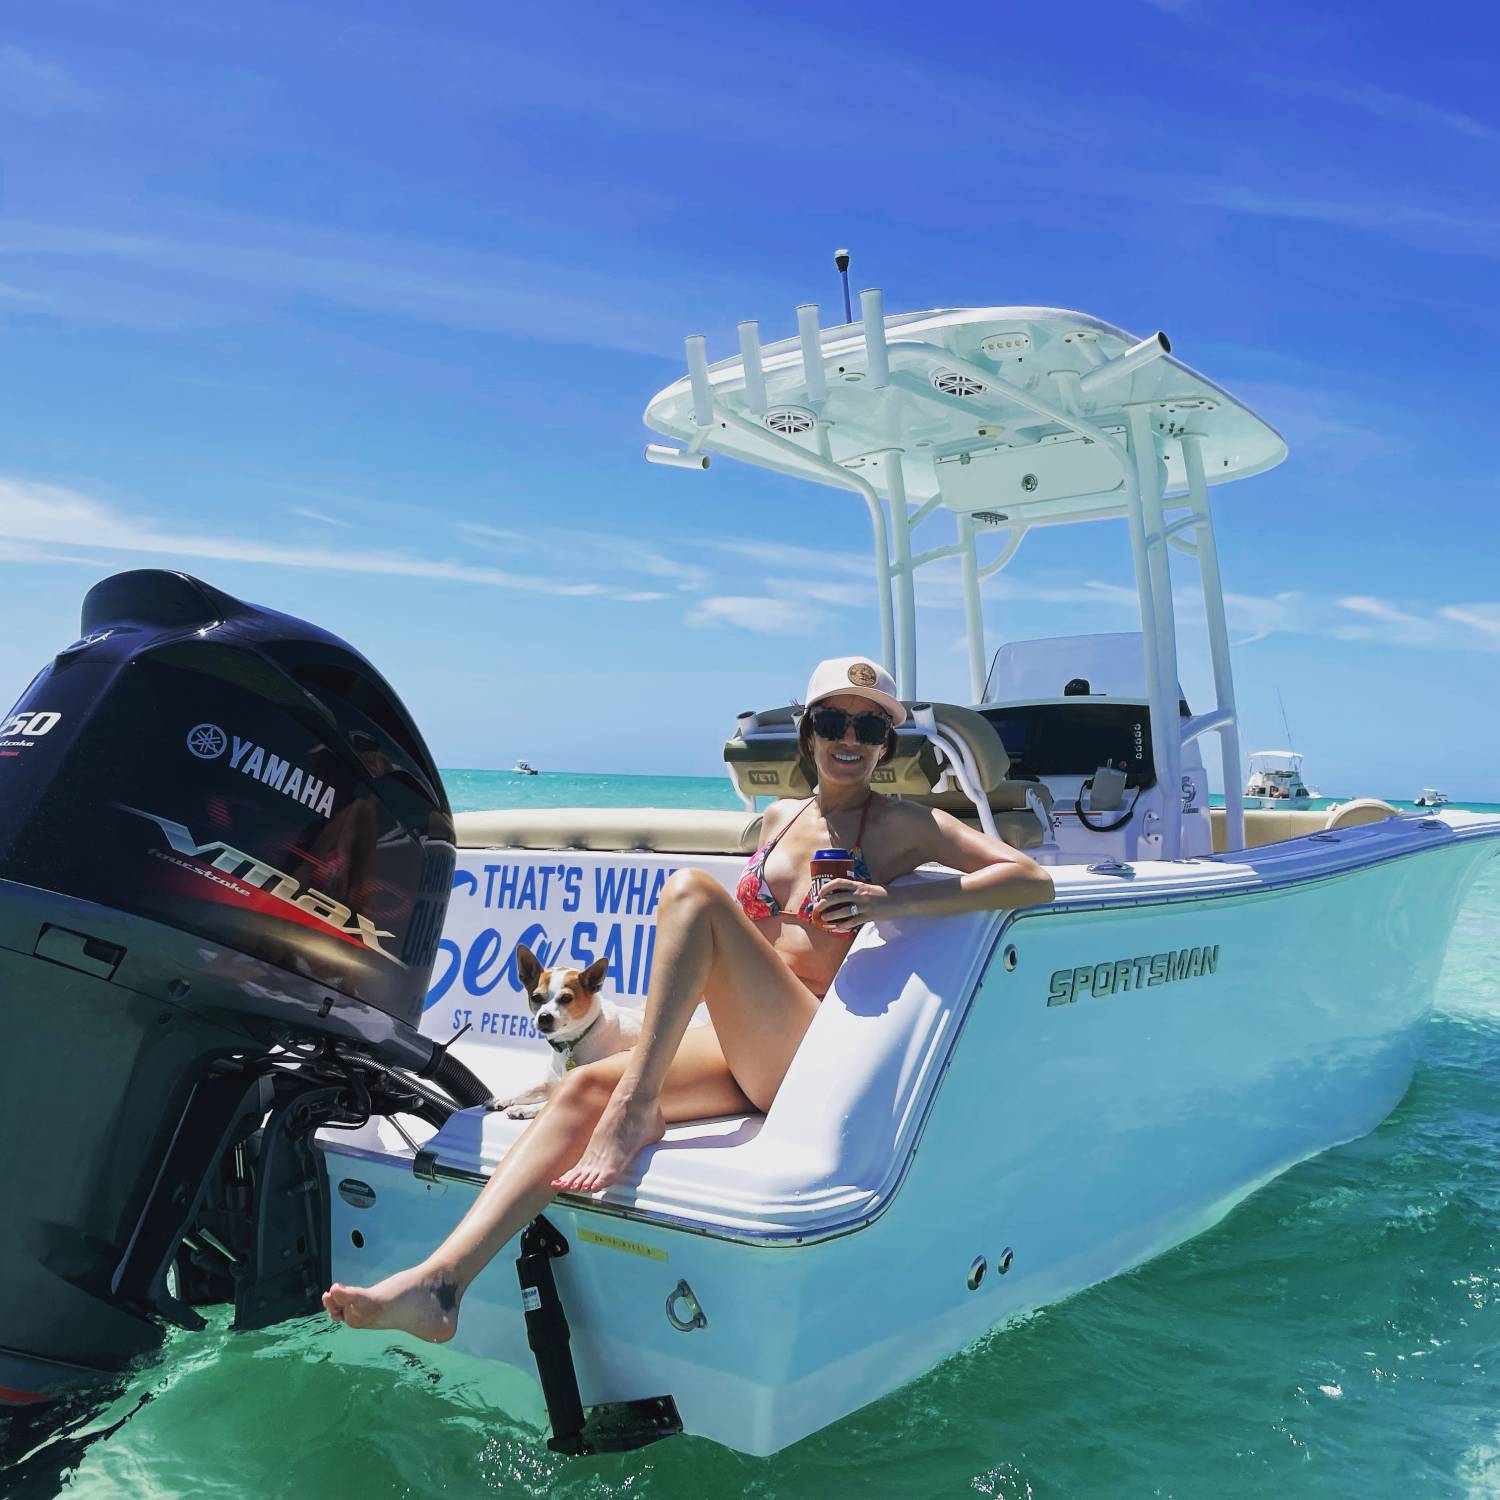 Title: Sandbar Day - On board their Sportsman Open 232 Center Console - Location: Passage Key, FL. Participating in the Photo Contest #SportsmanApril